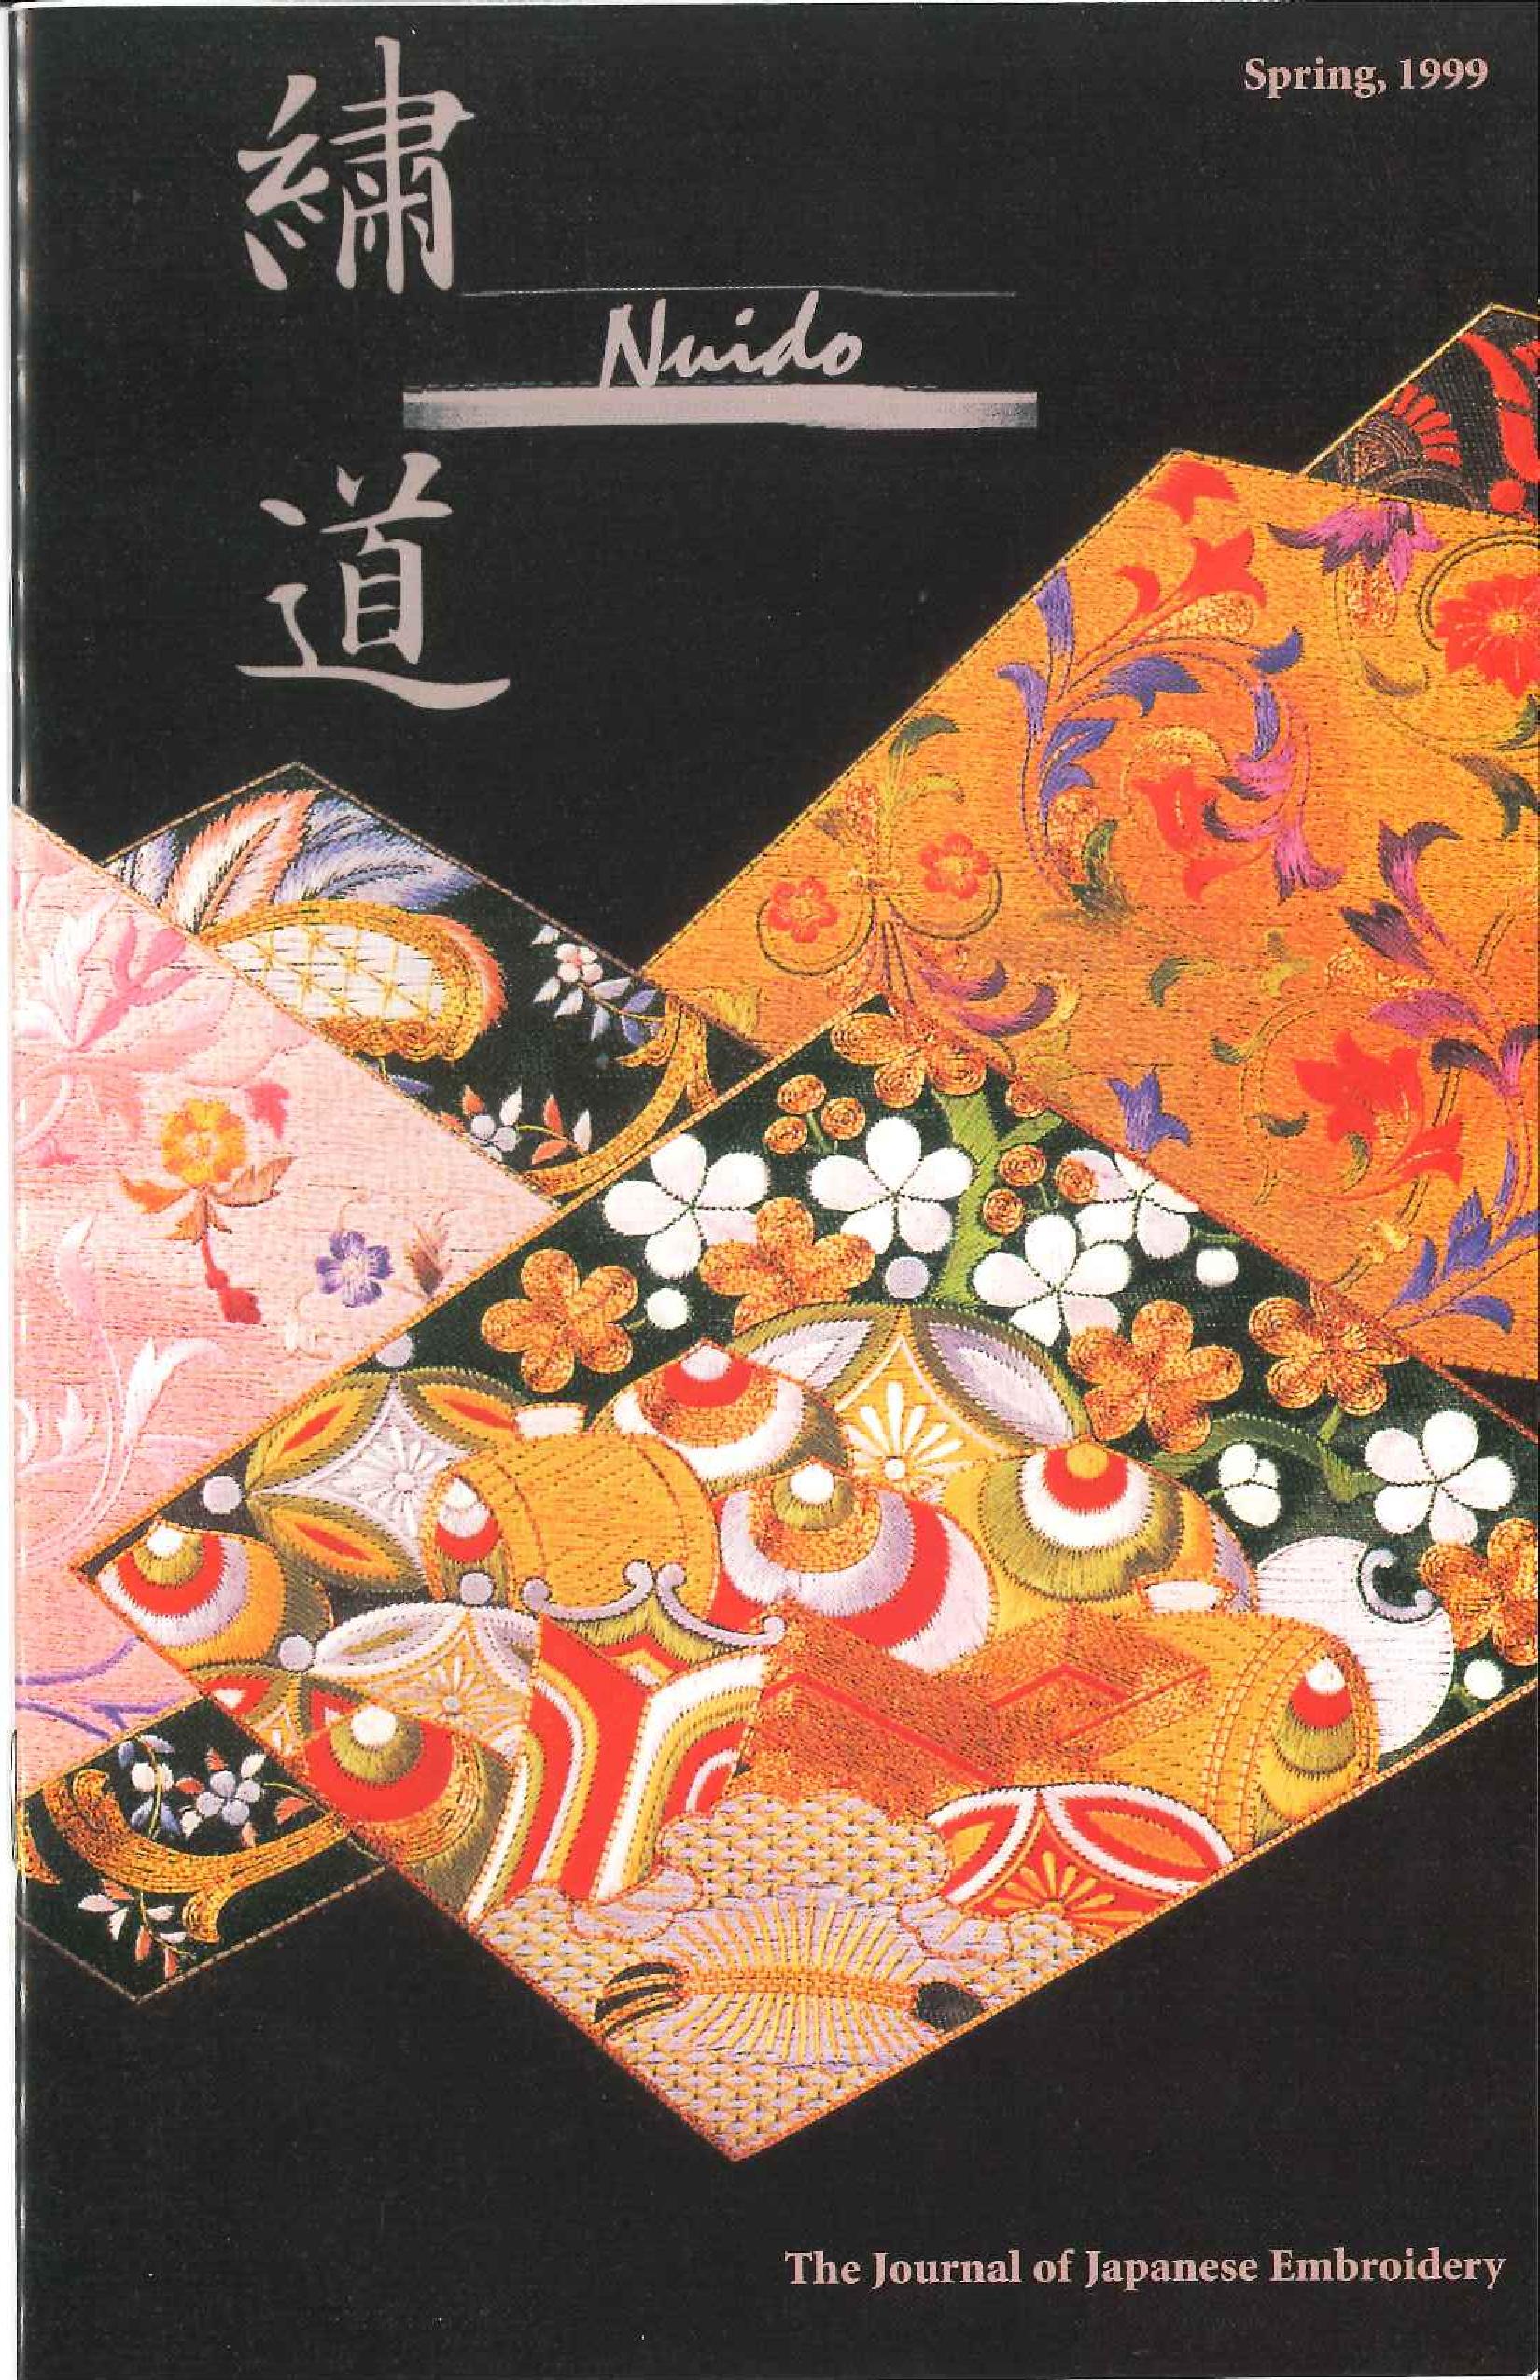 Nuido Journal 1999 Spring - Nuido - The Way of Japanese Embroidery Site